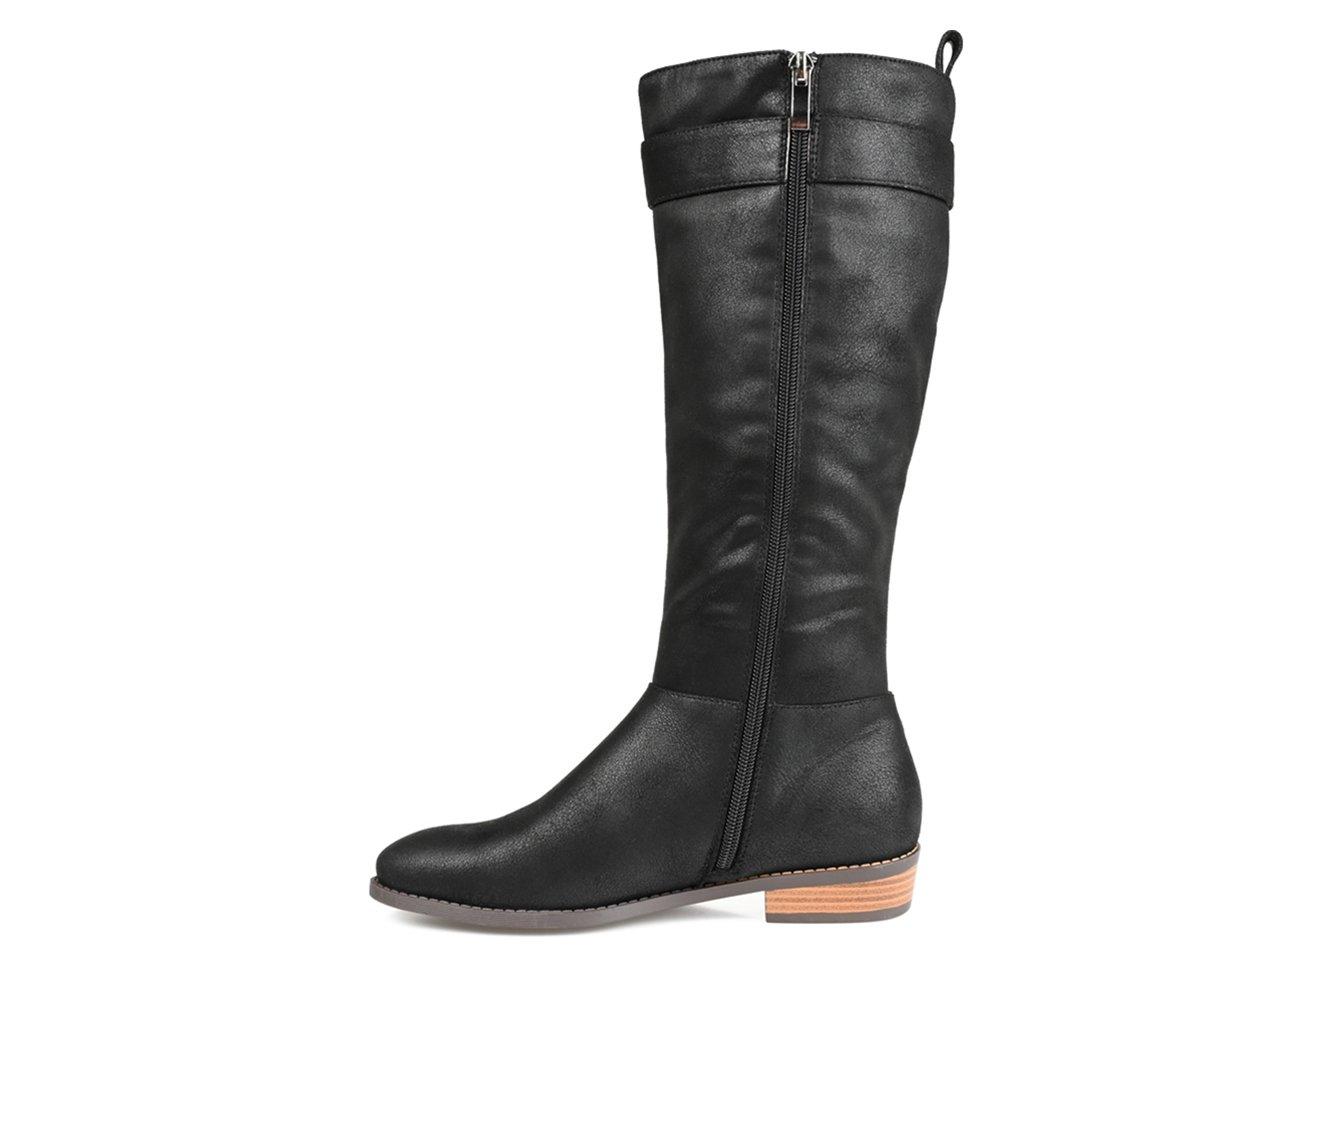 Women's Journee Collection Lelanni Wide Calf Knee High Boots